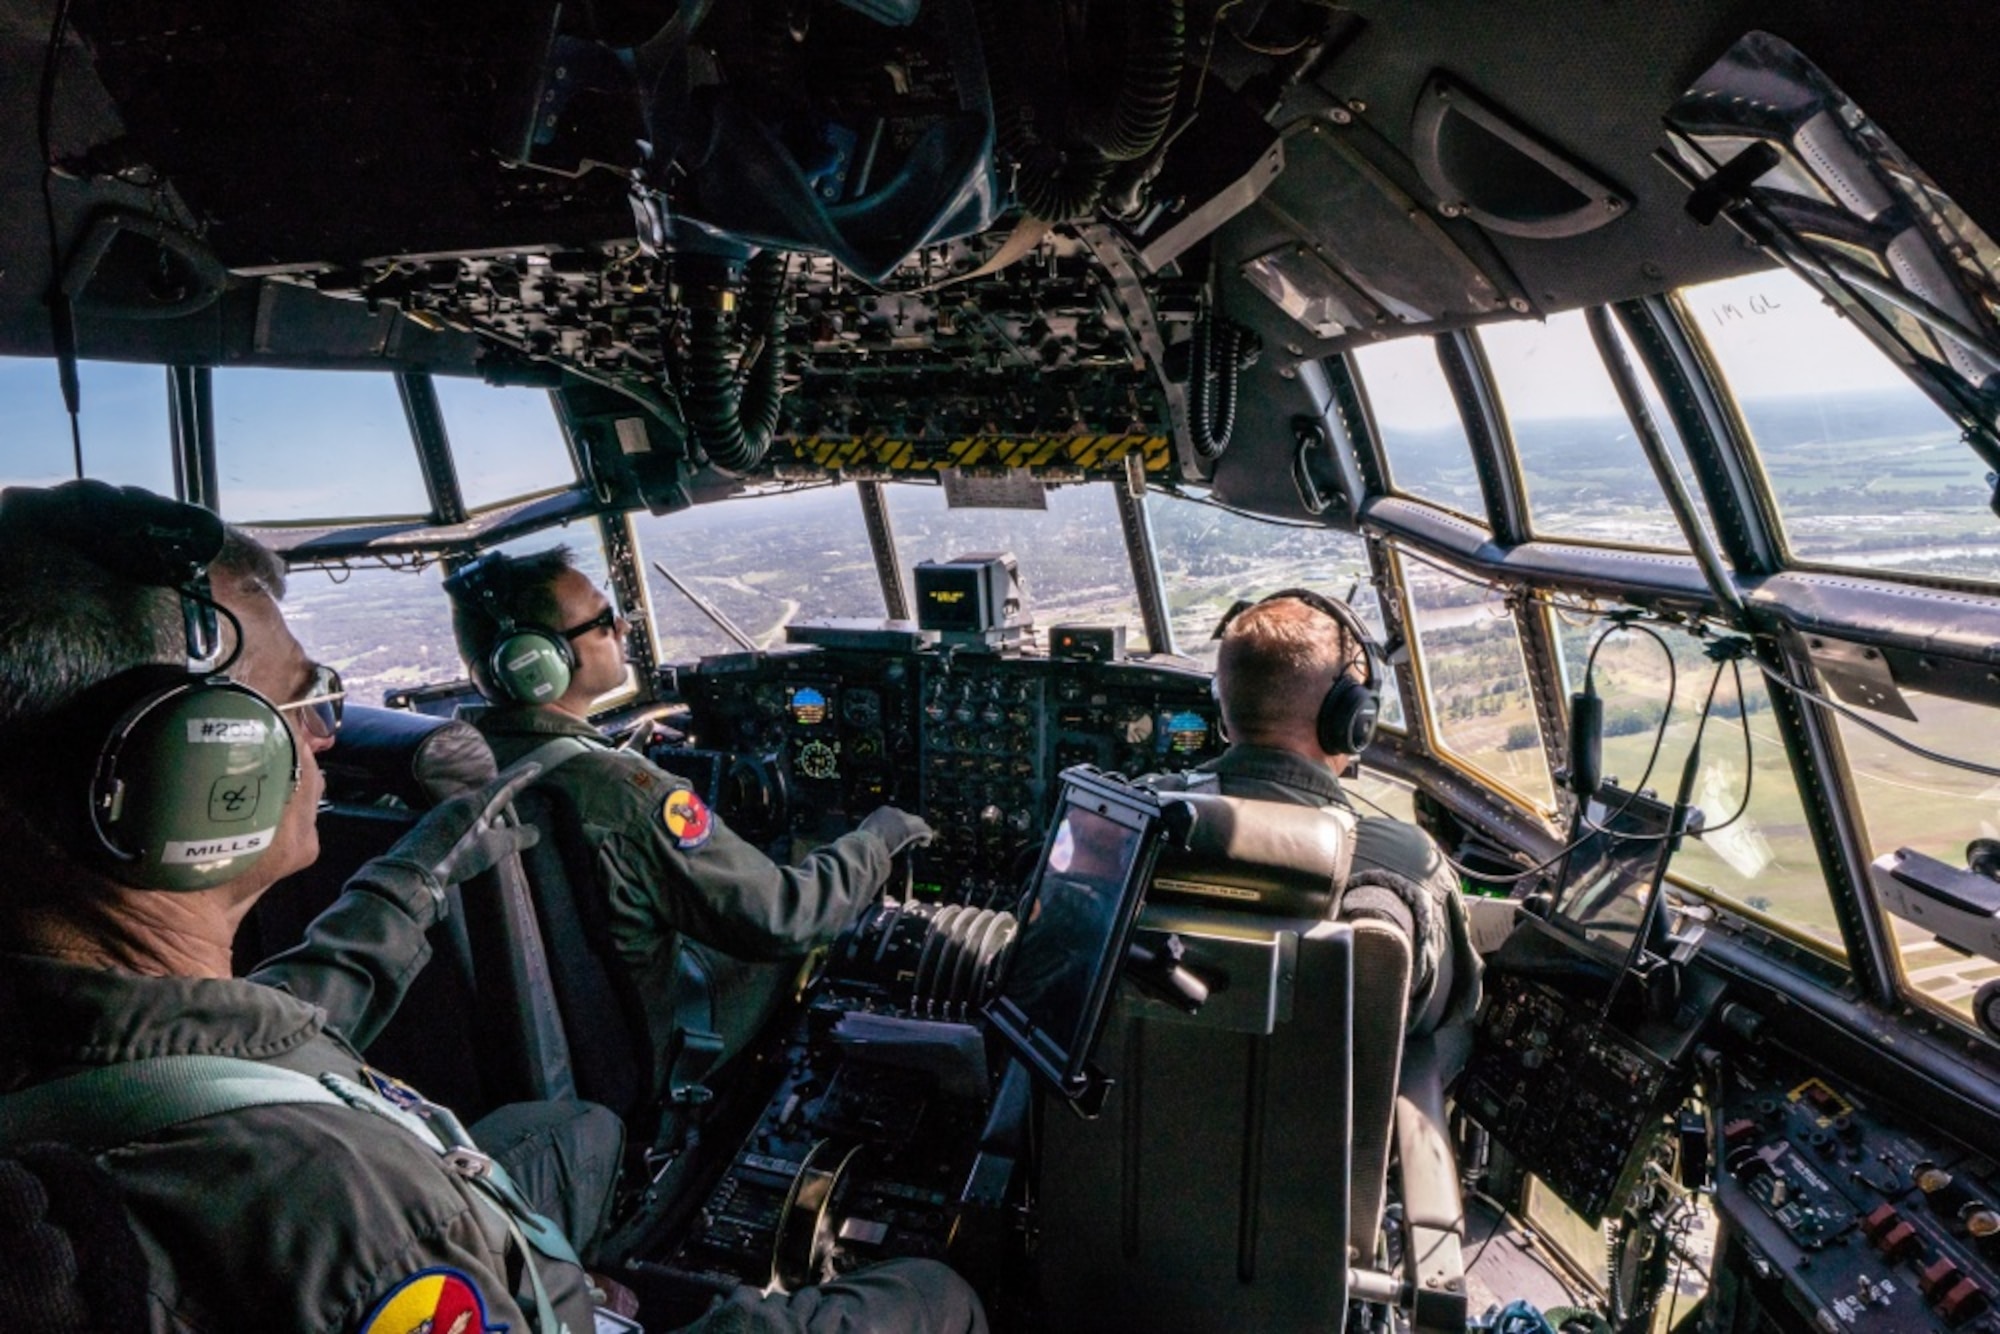 U.S. Air Force Maj. Ed Fattmann, center, a pilot assigned to the 180th Airlift Squadron, Missouri Air National Guard, takes his first flight as an aircraft commander with one eye above St. Joseph, Missouri, Sept. 4, 2019. Fattman has been a pilot with the 180th AS since 2009, but was put on ‘duty not including flying’ status after losing sight in his right eye from a firework misfire in 2012. For his first flight back in military status, he flew with his original crew from his first deployment to Afghanistan in 2010. (U.S. Air National Guard photo by Tech. Sgt. Patrick Evenson)